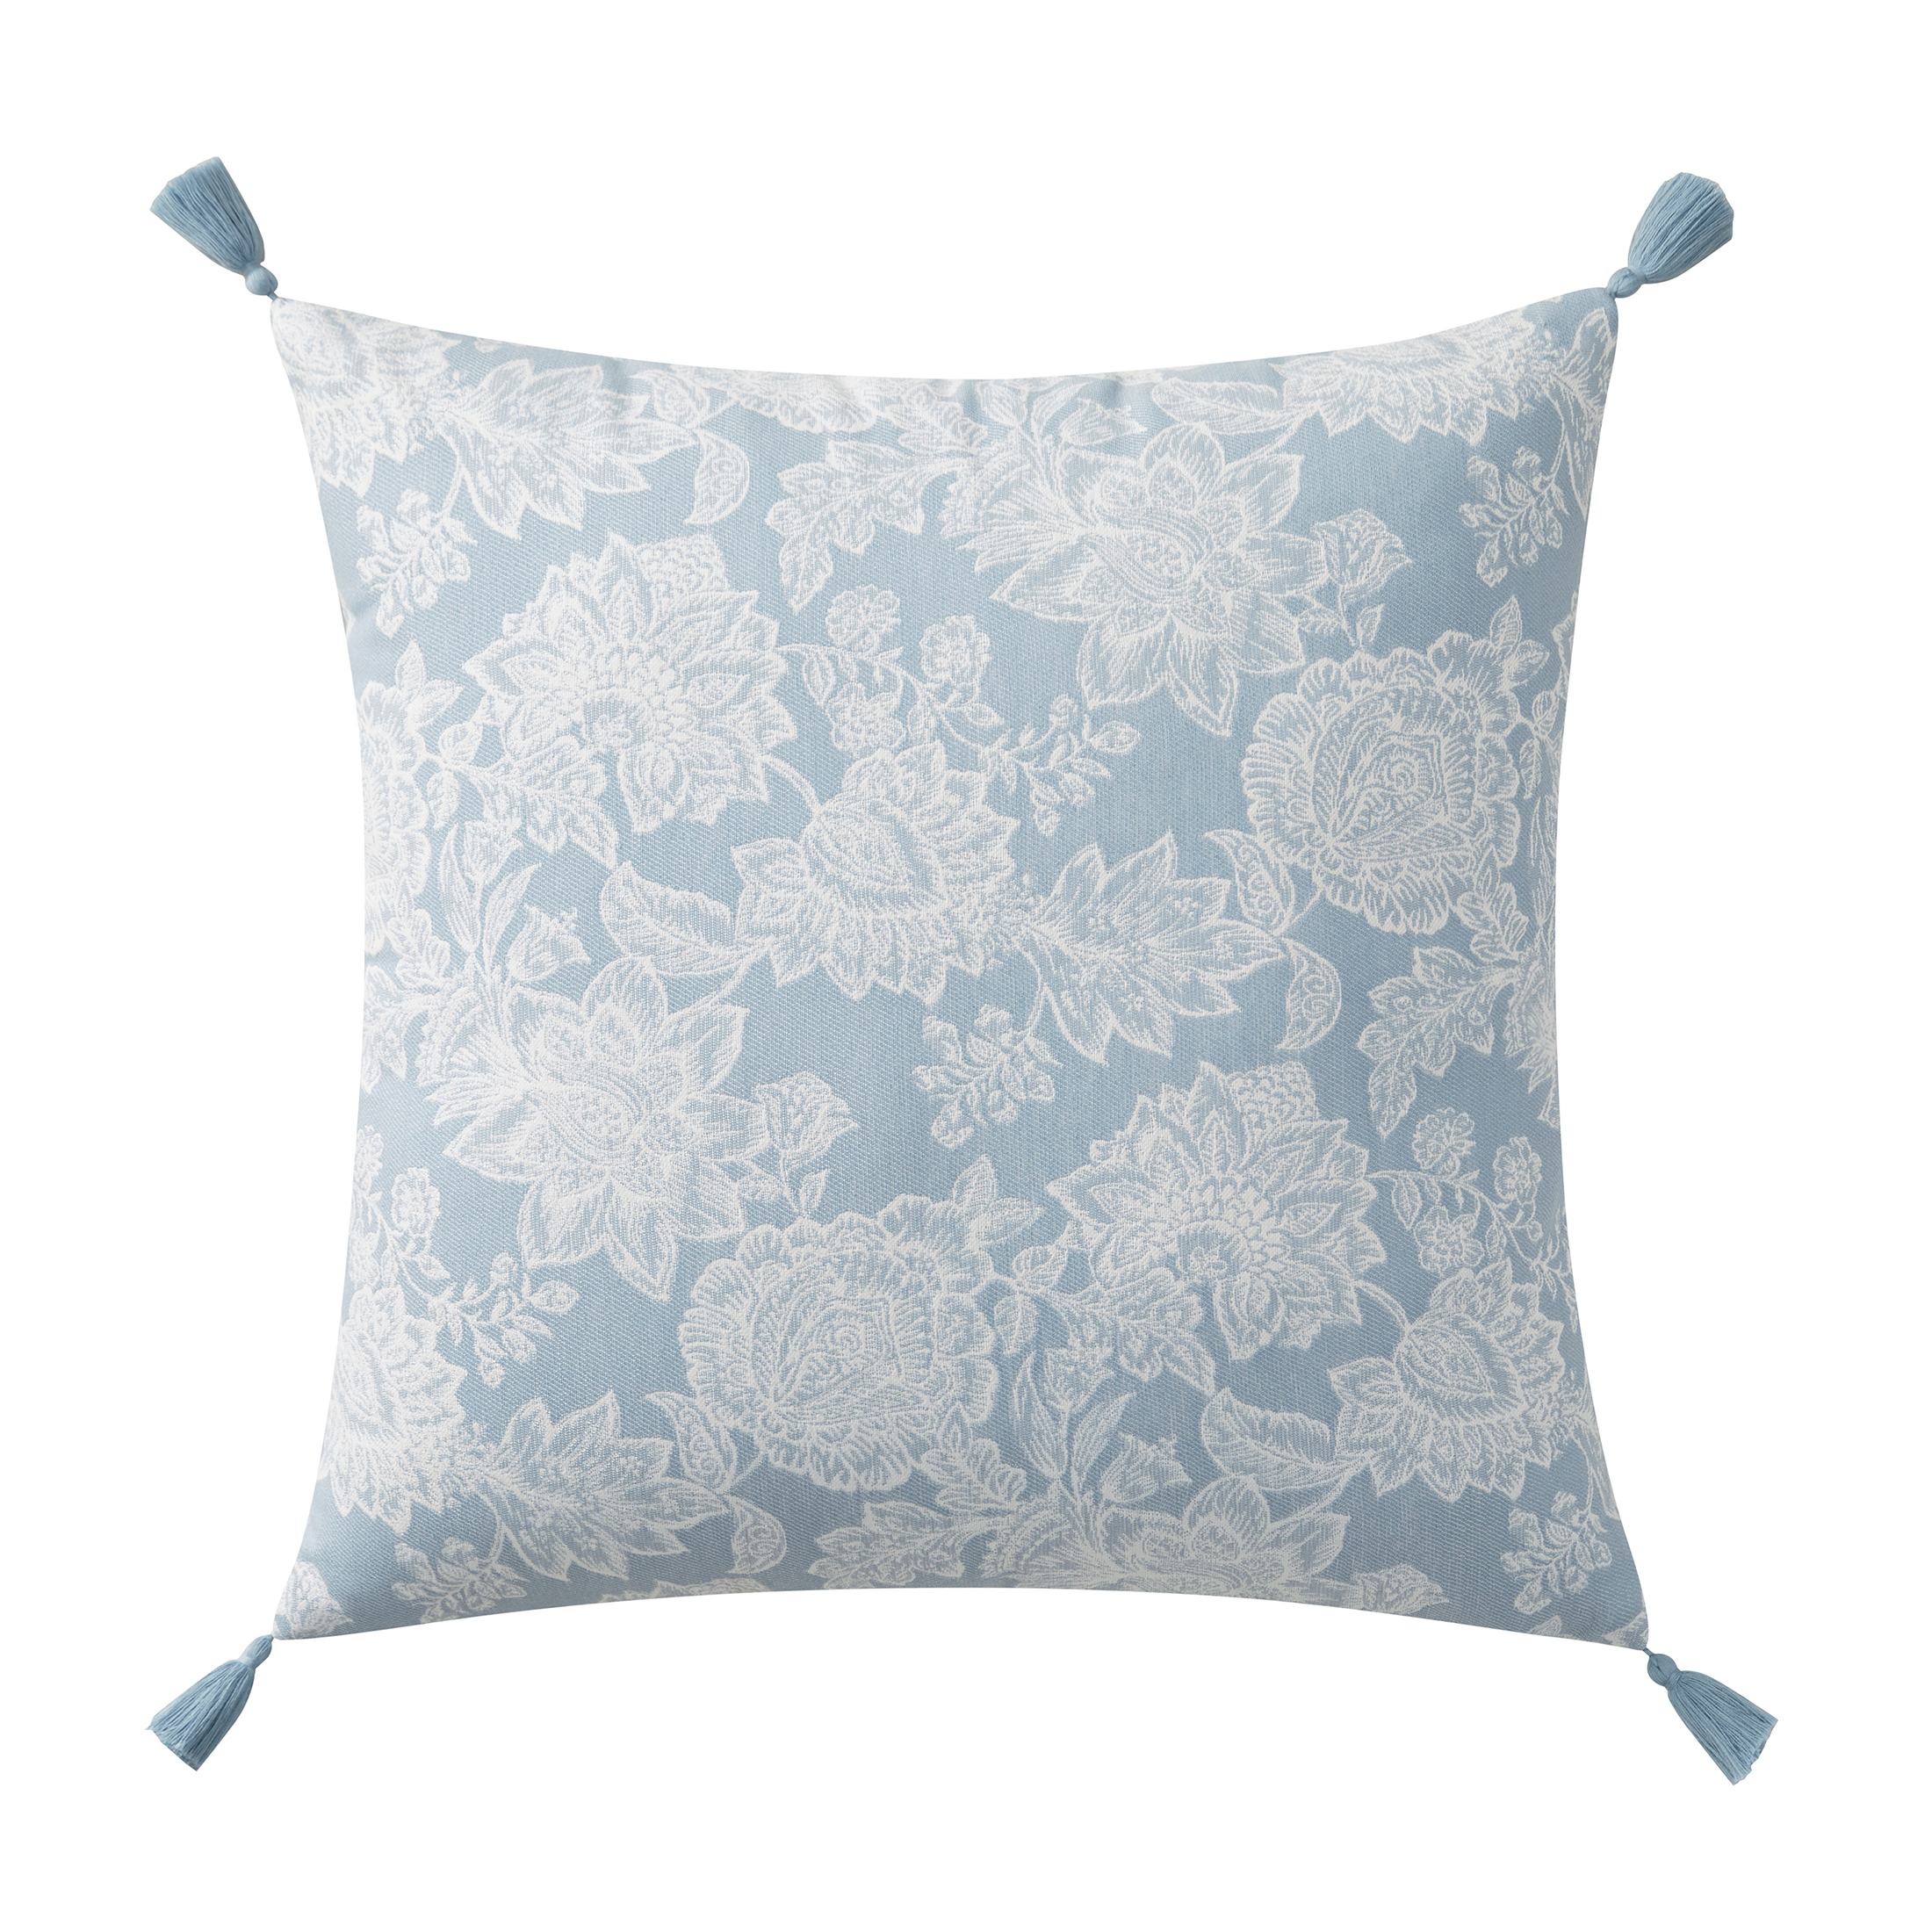 My Texas House 20" x 20" Blue Veronica Floral Tassel Decorative Pillow Cover - image 1 of 7